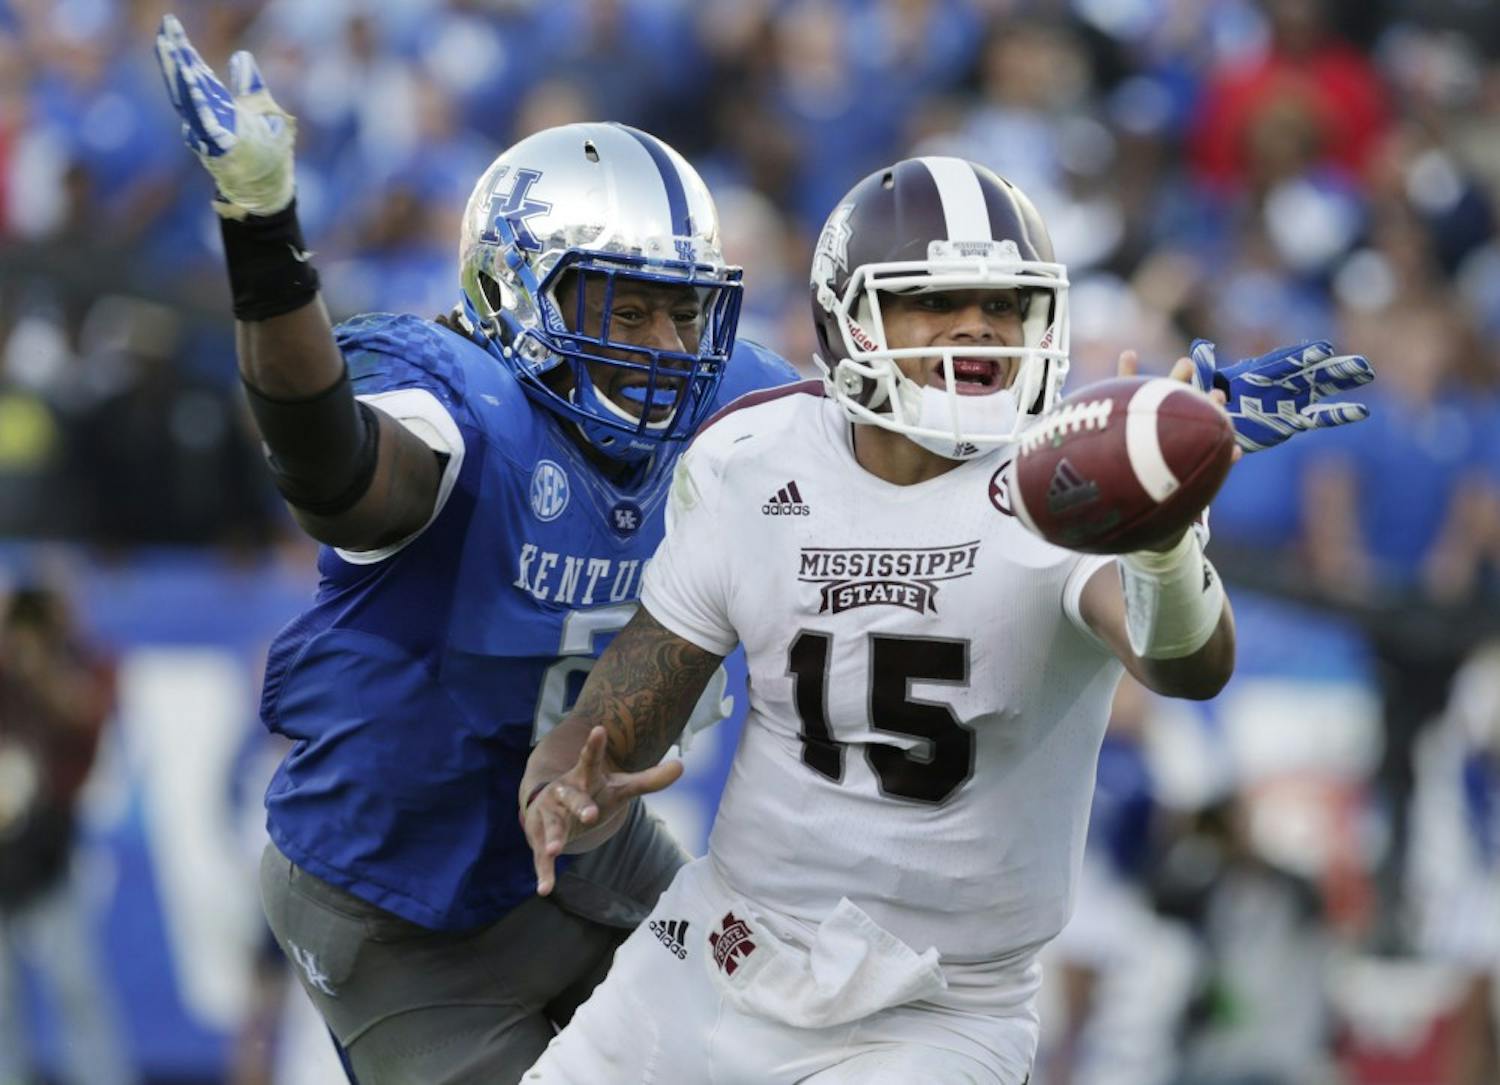 Mississippi State quarterback Dak Prescott (15) makes a lateral pass as Kentucky's Alvin Dupree (2) triesto sack him in the third quarter of the Mississippi State at Kentucky at Commonwealth Stadium in Lexington, Ky., on Oct. 25, 2014. Miss. St. won 45-31. (Pablo Alcala/Lexington Herald-Leader/MCT) 